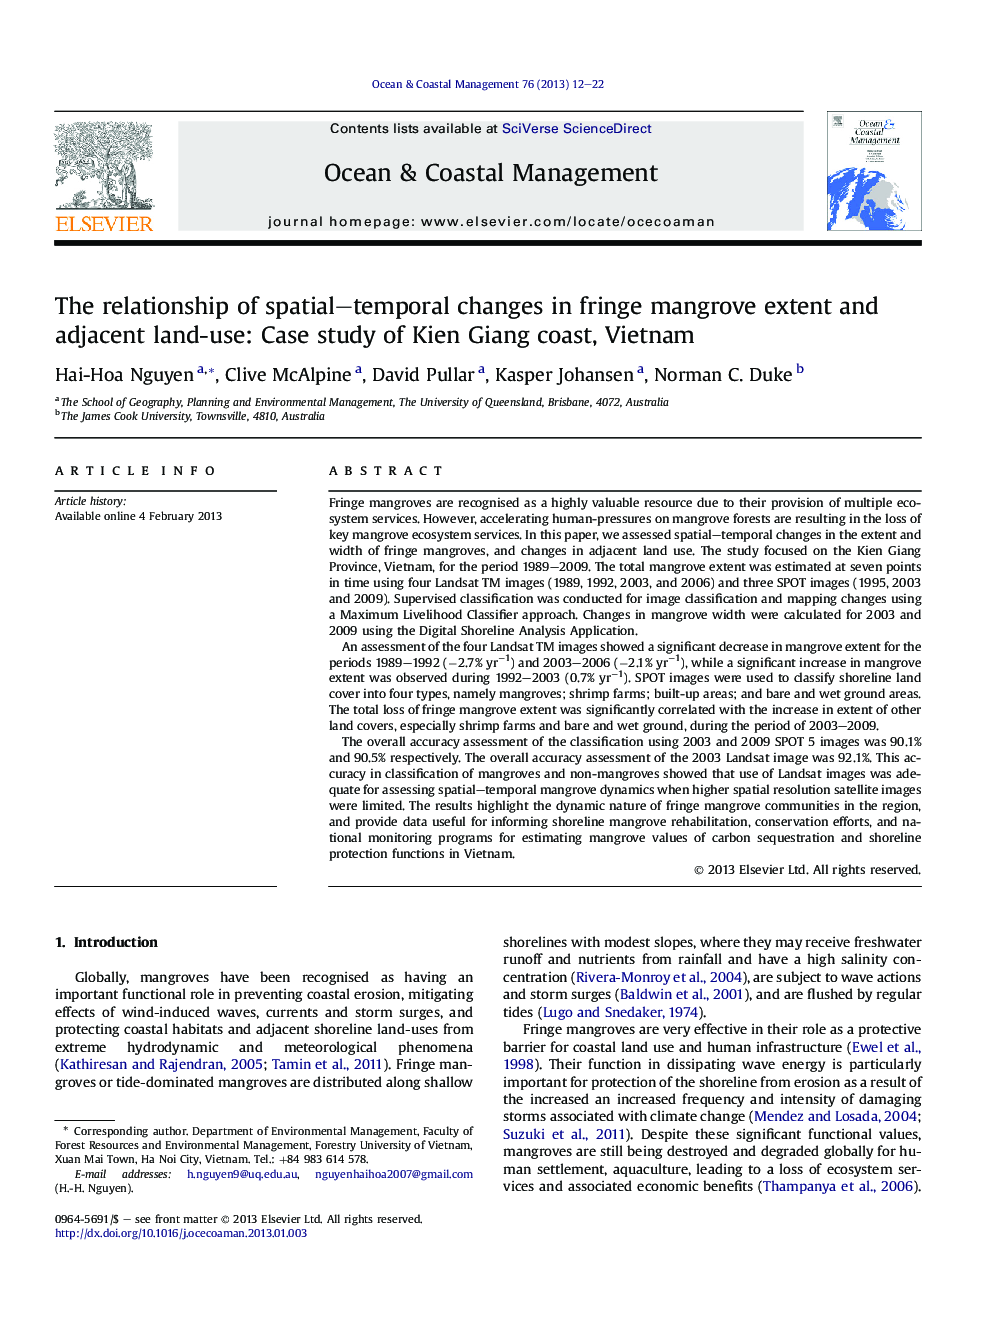 The relationship of spatial–temporal changes in fringe mangrove extent and adjacent land-use: Case study of Kien Giang coast, Vietnam